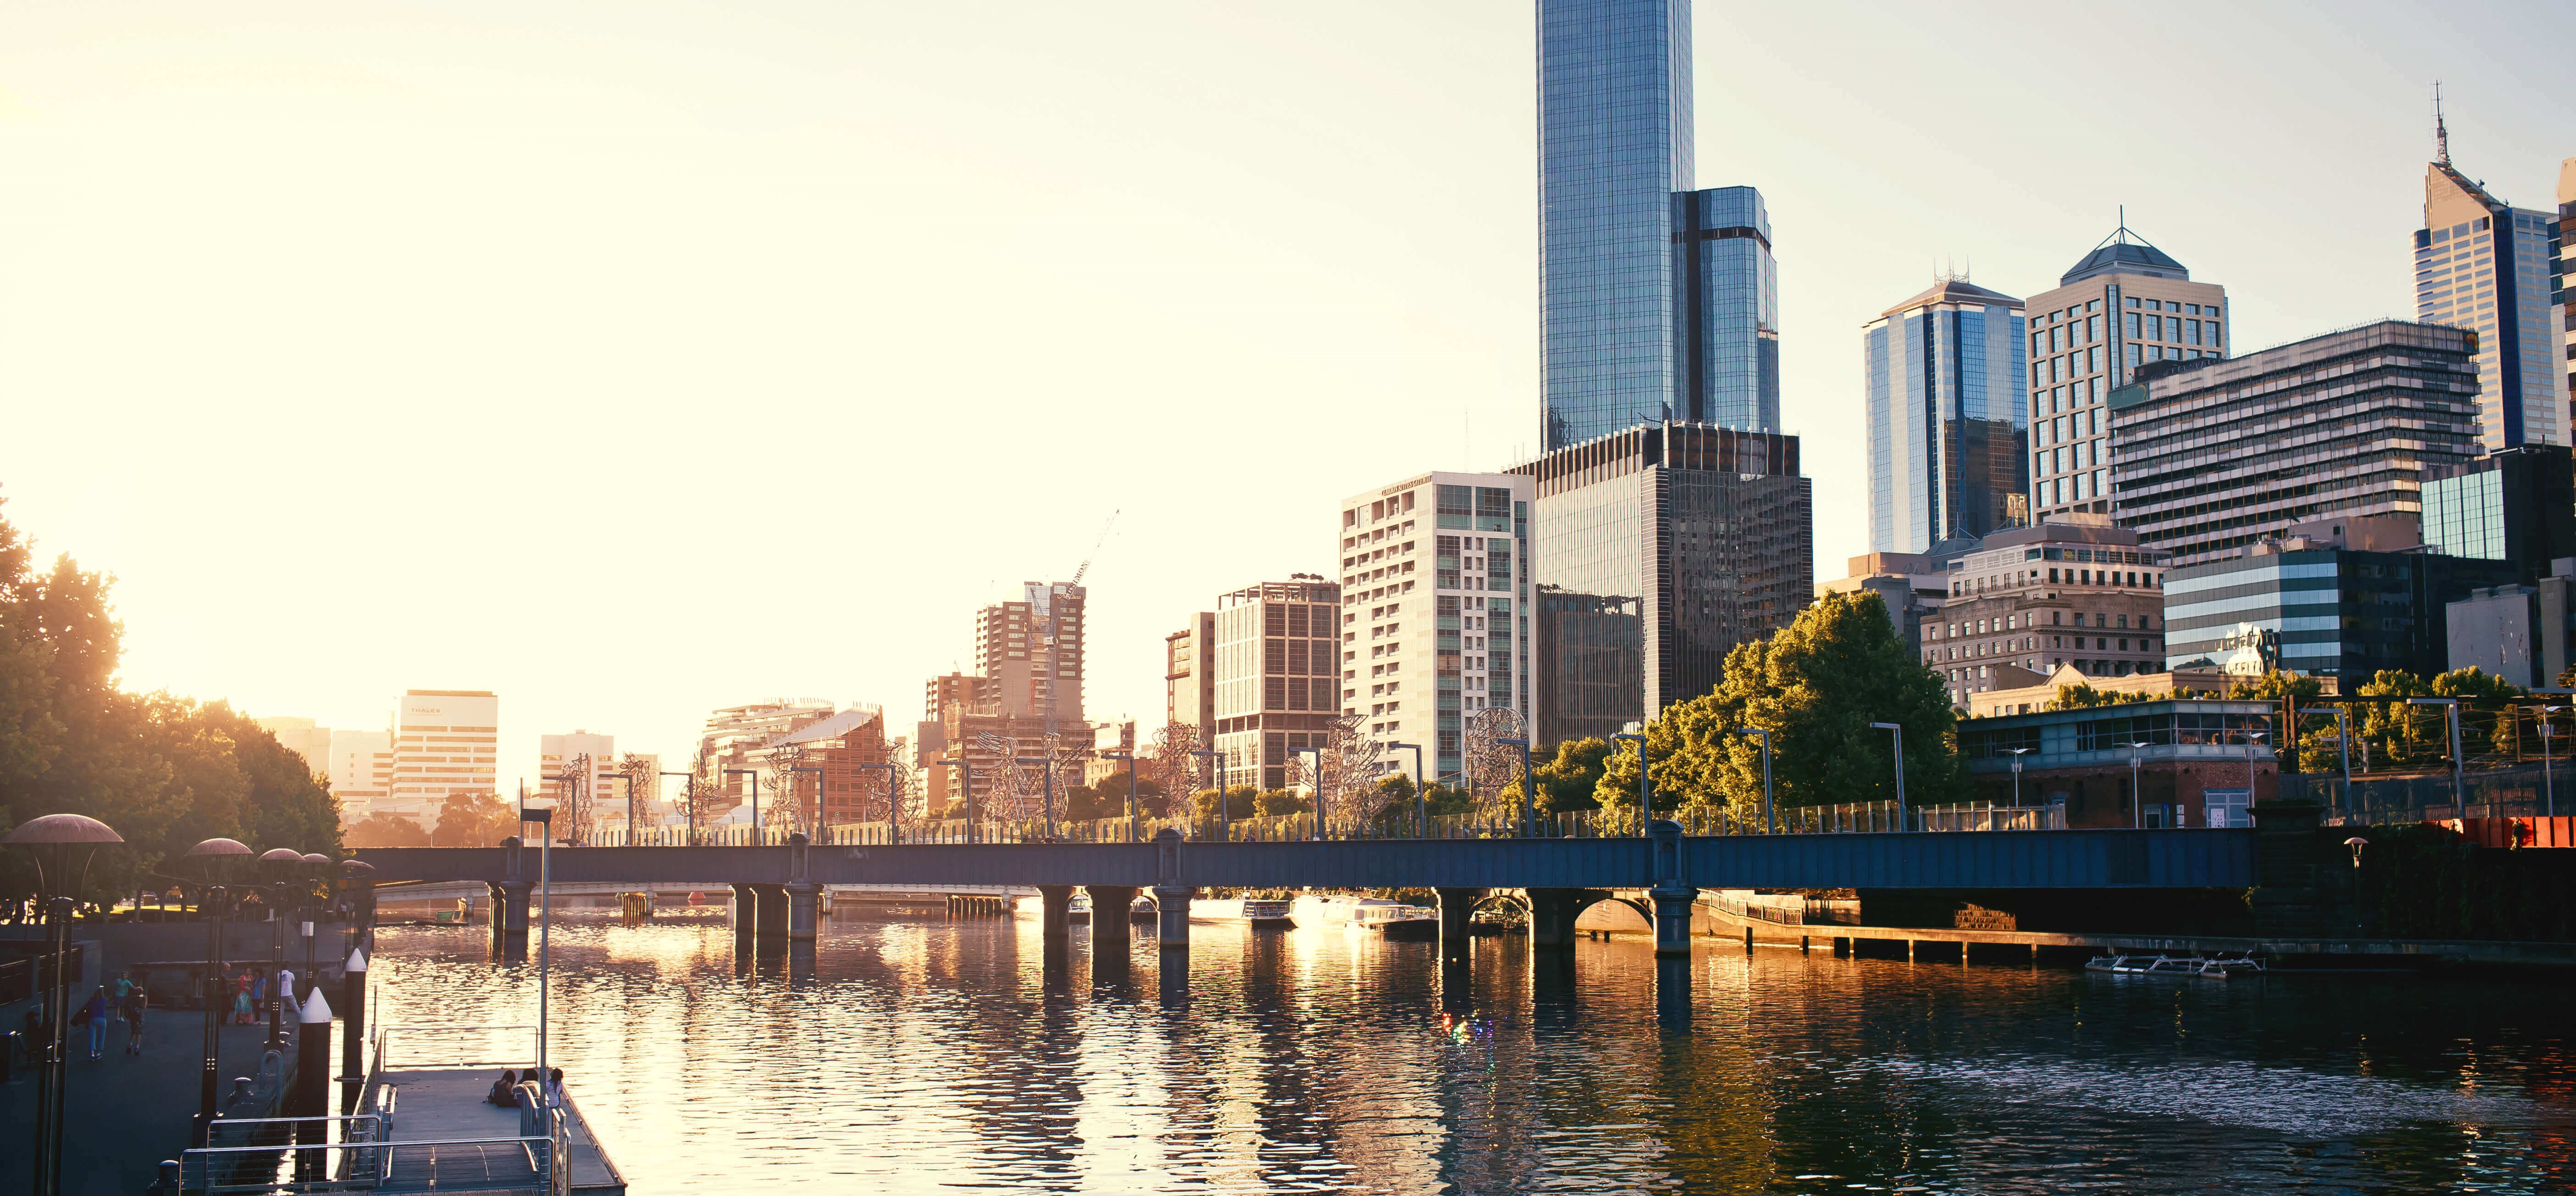 Melbourne_tinypng